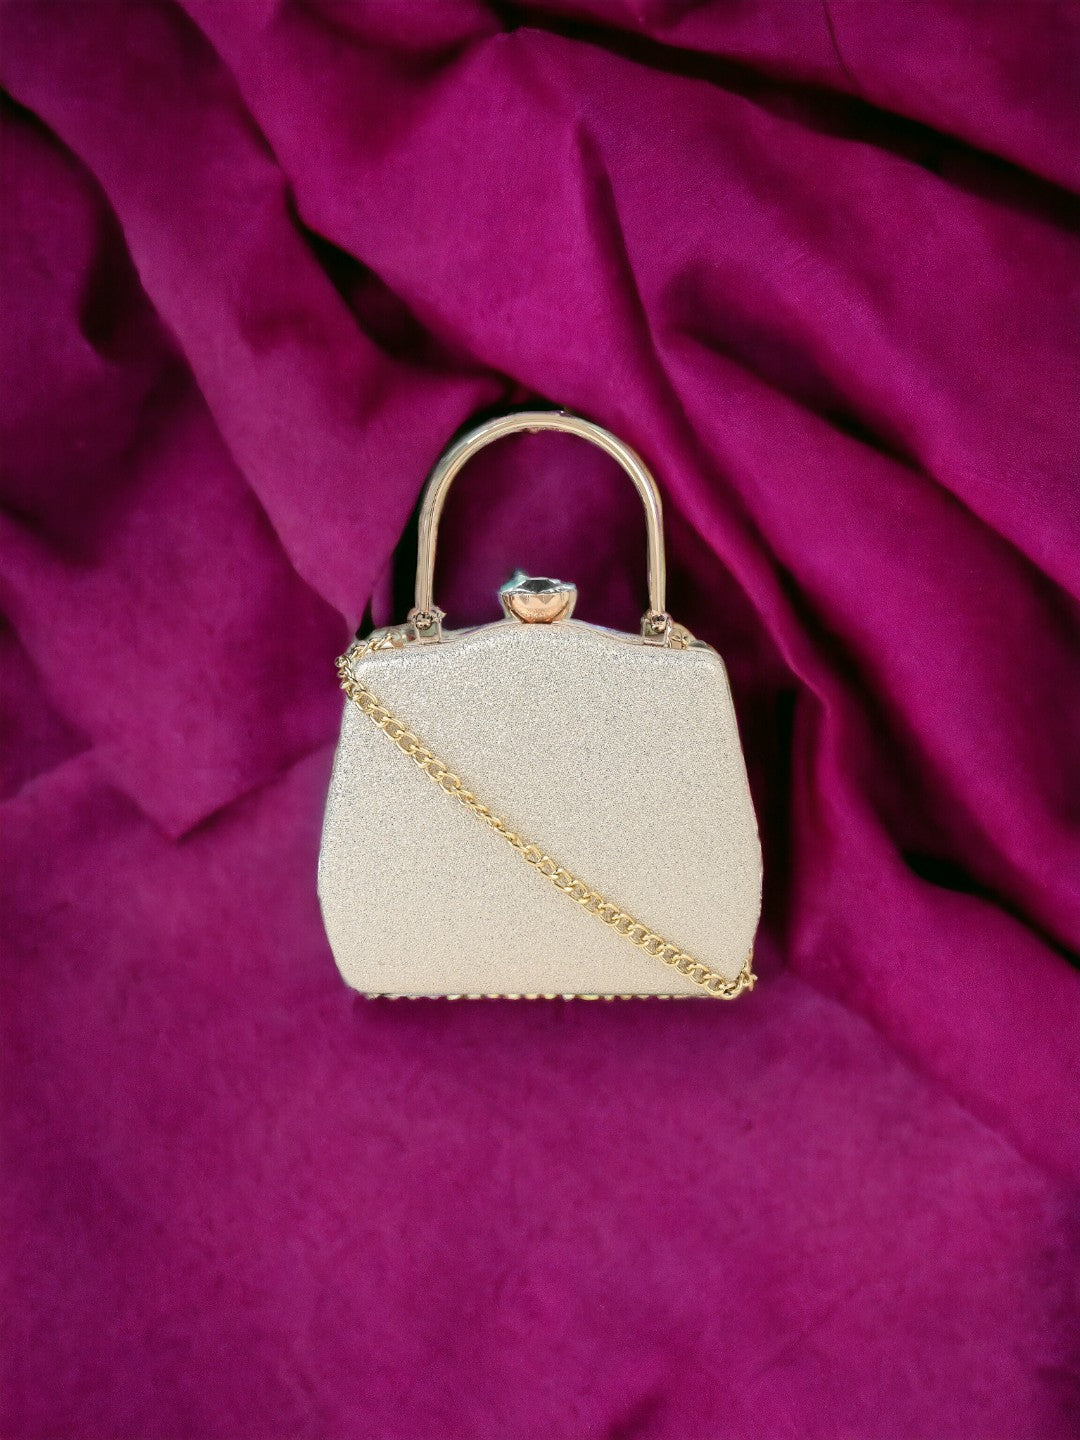 A white Vdesi clutch purse with a shiny surface.